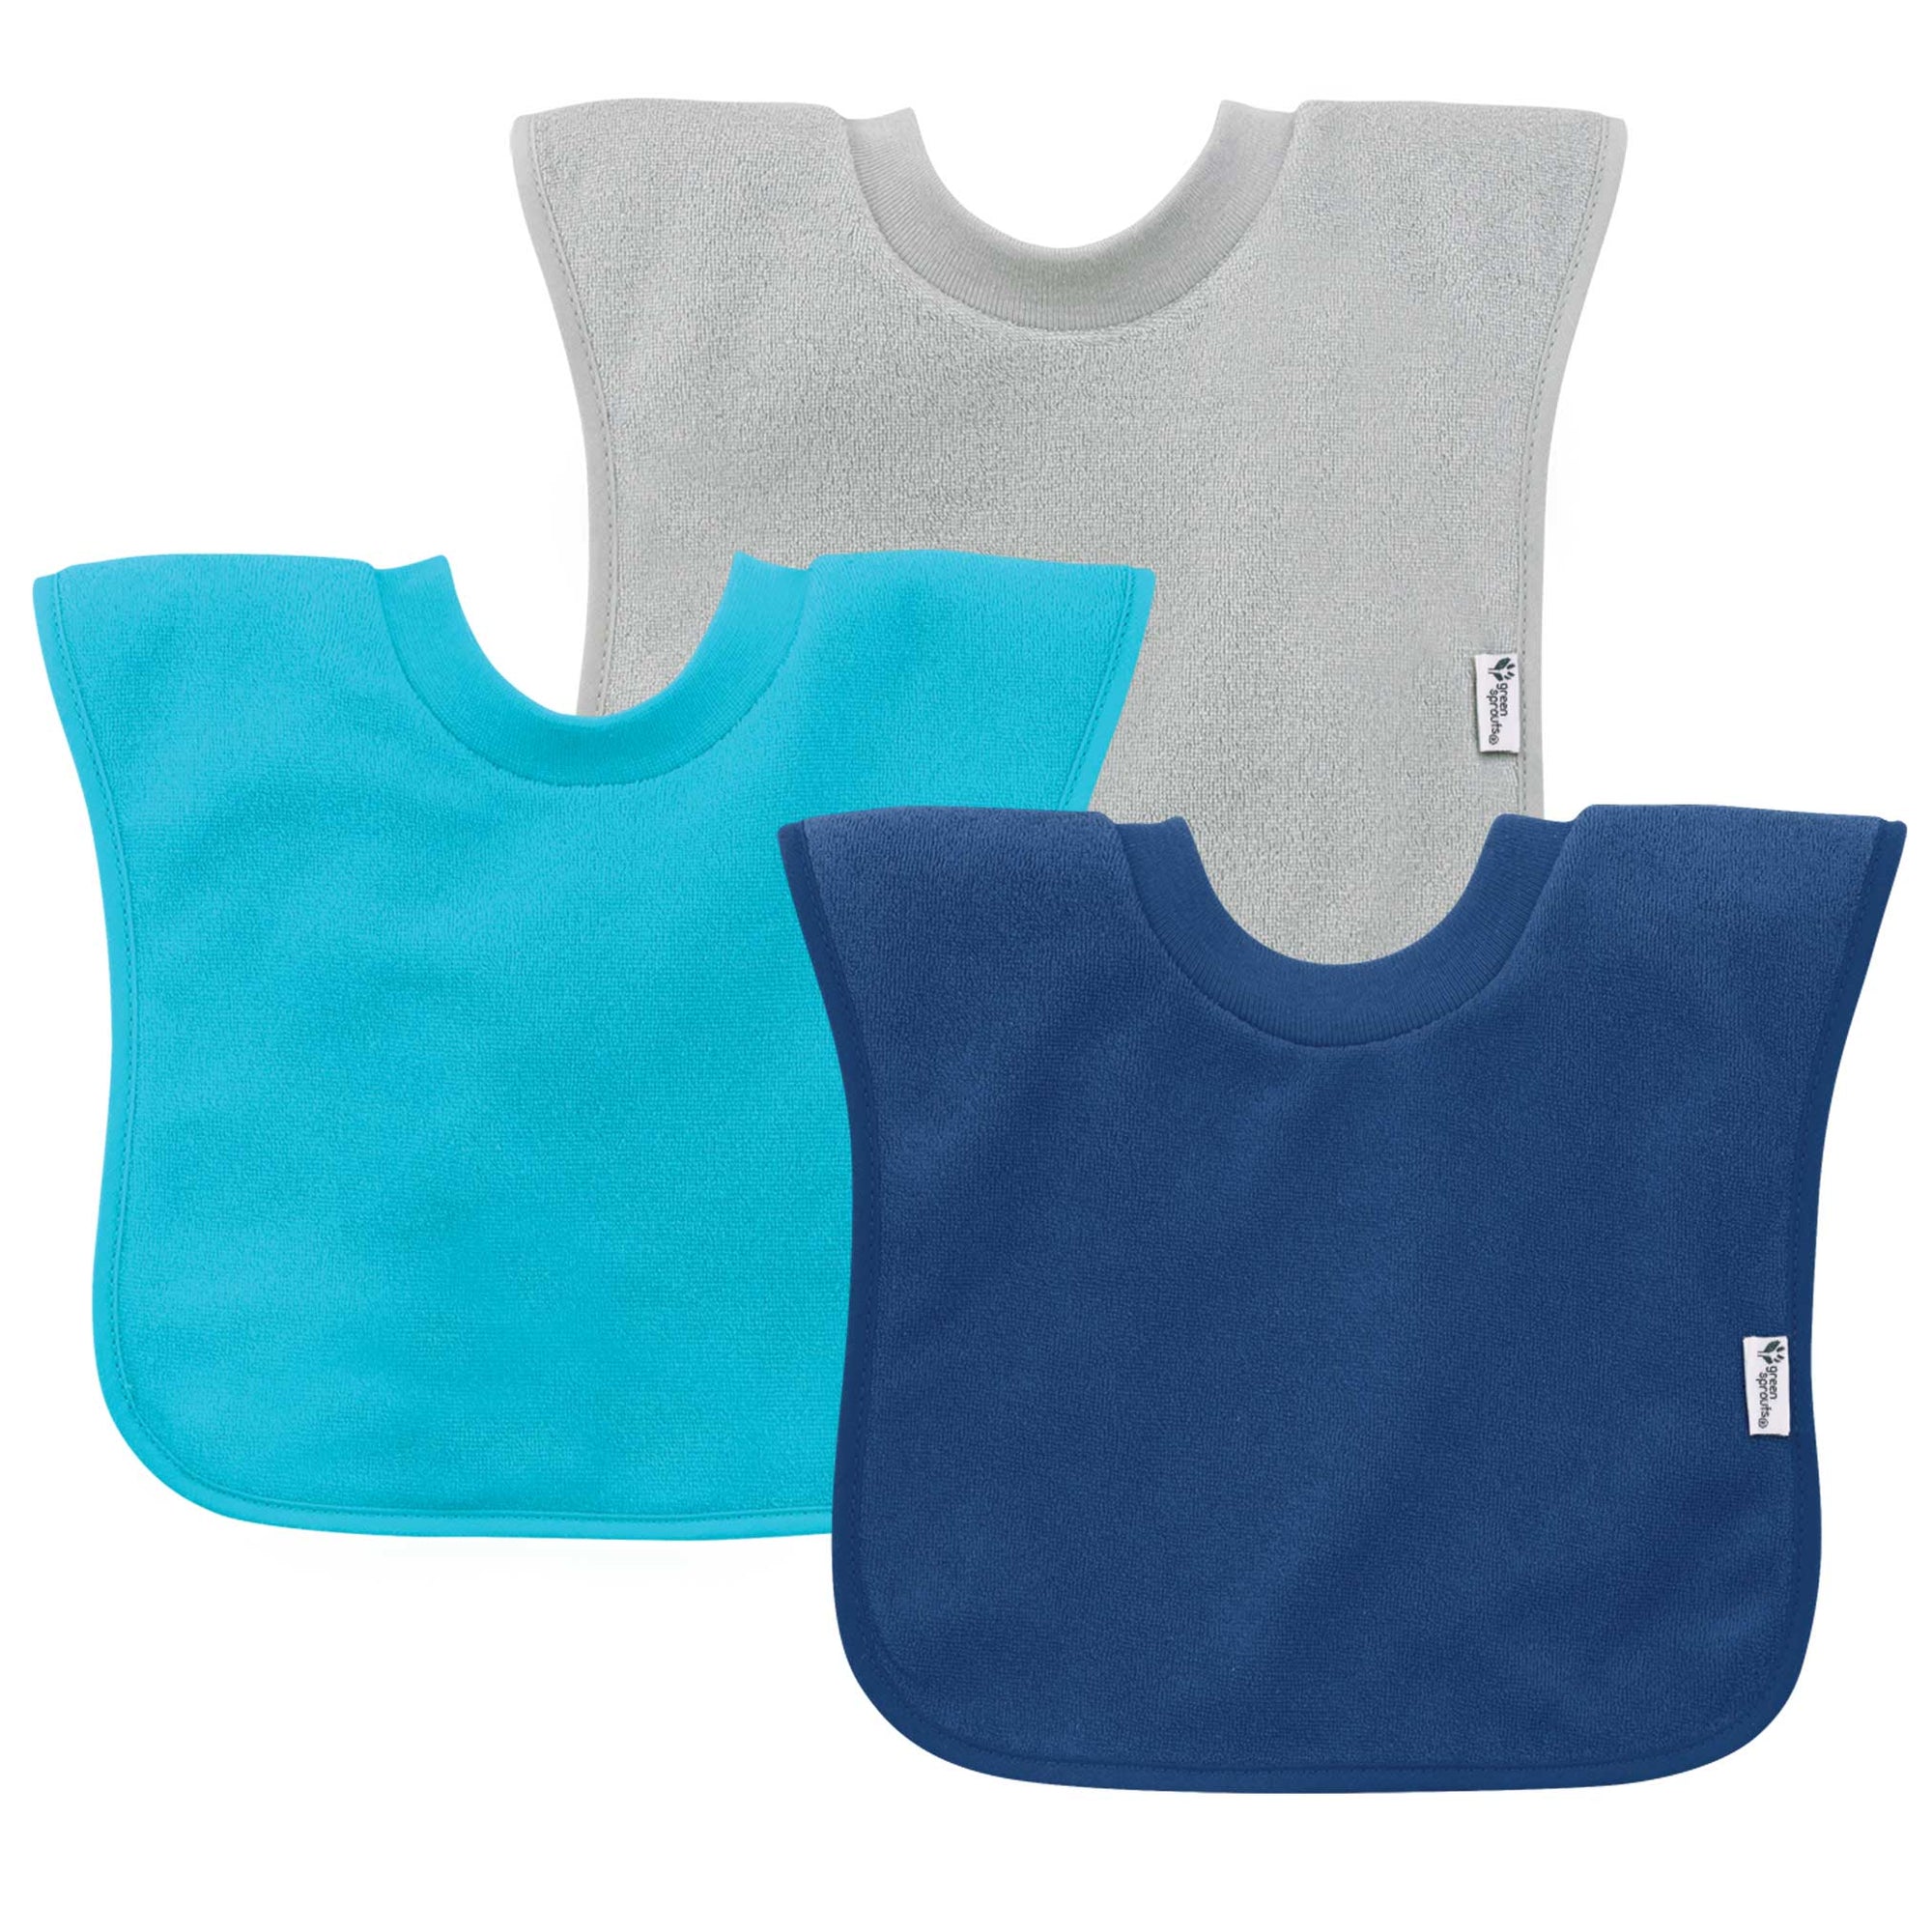 Stay-dry Pull-over Bibs (3 pack)